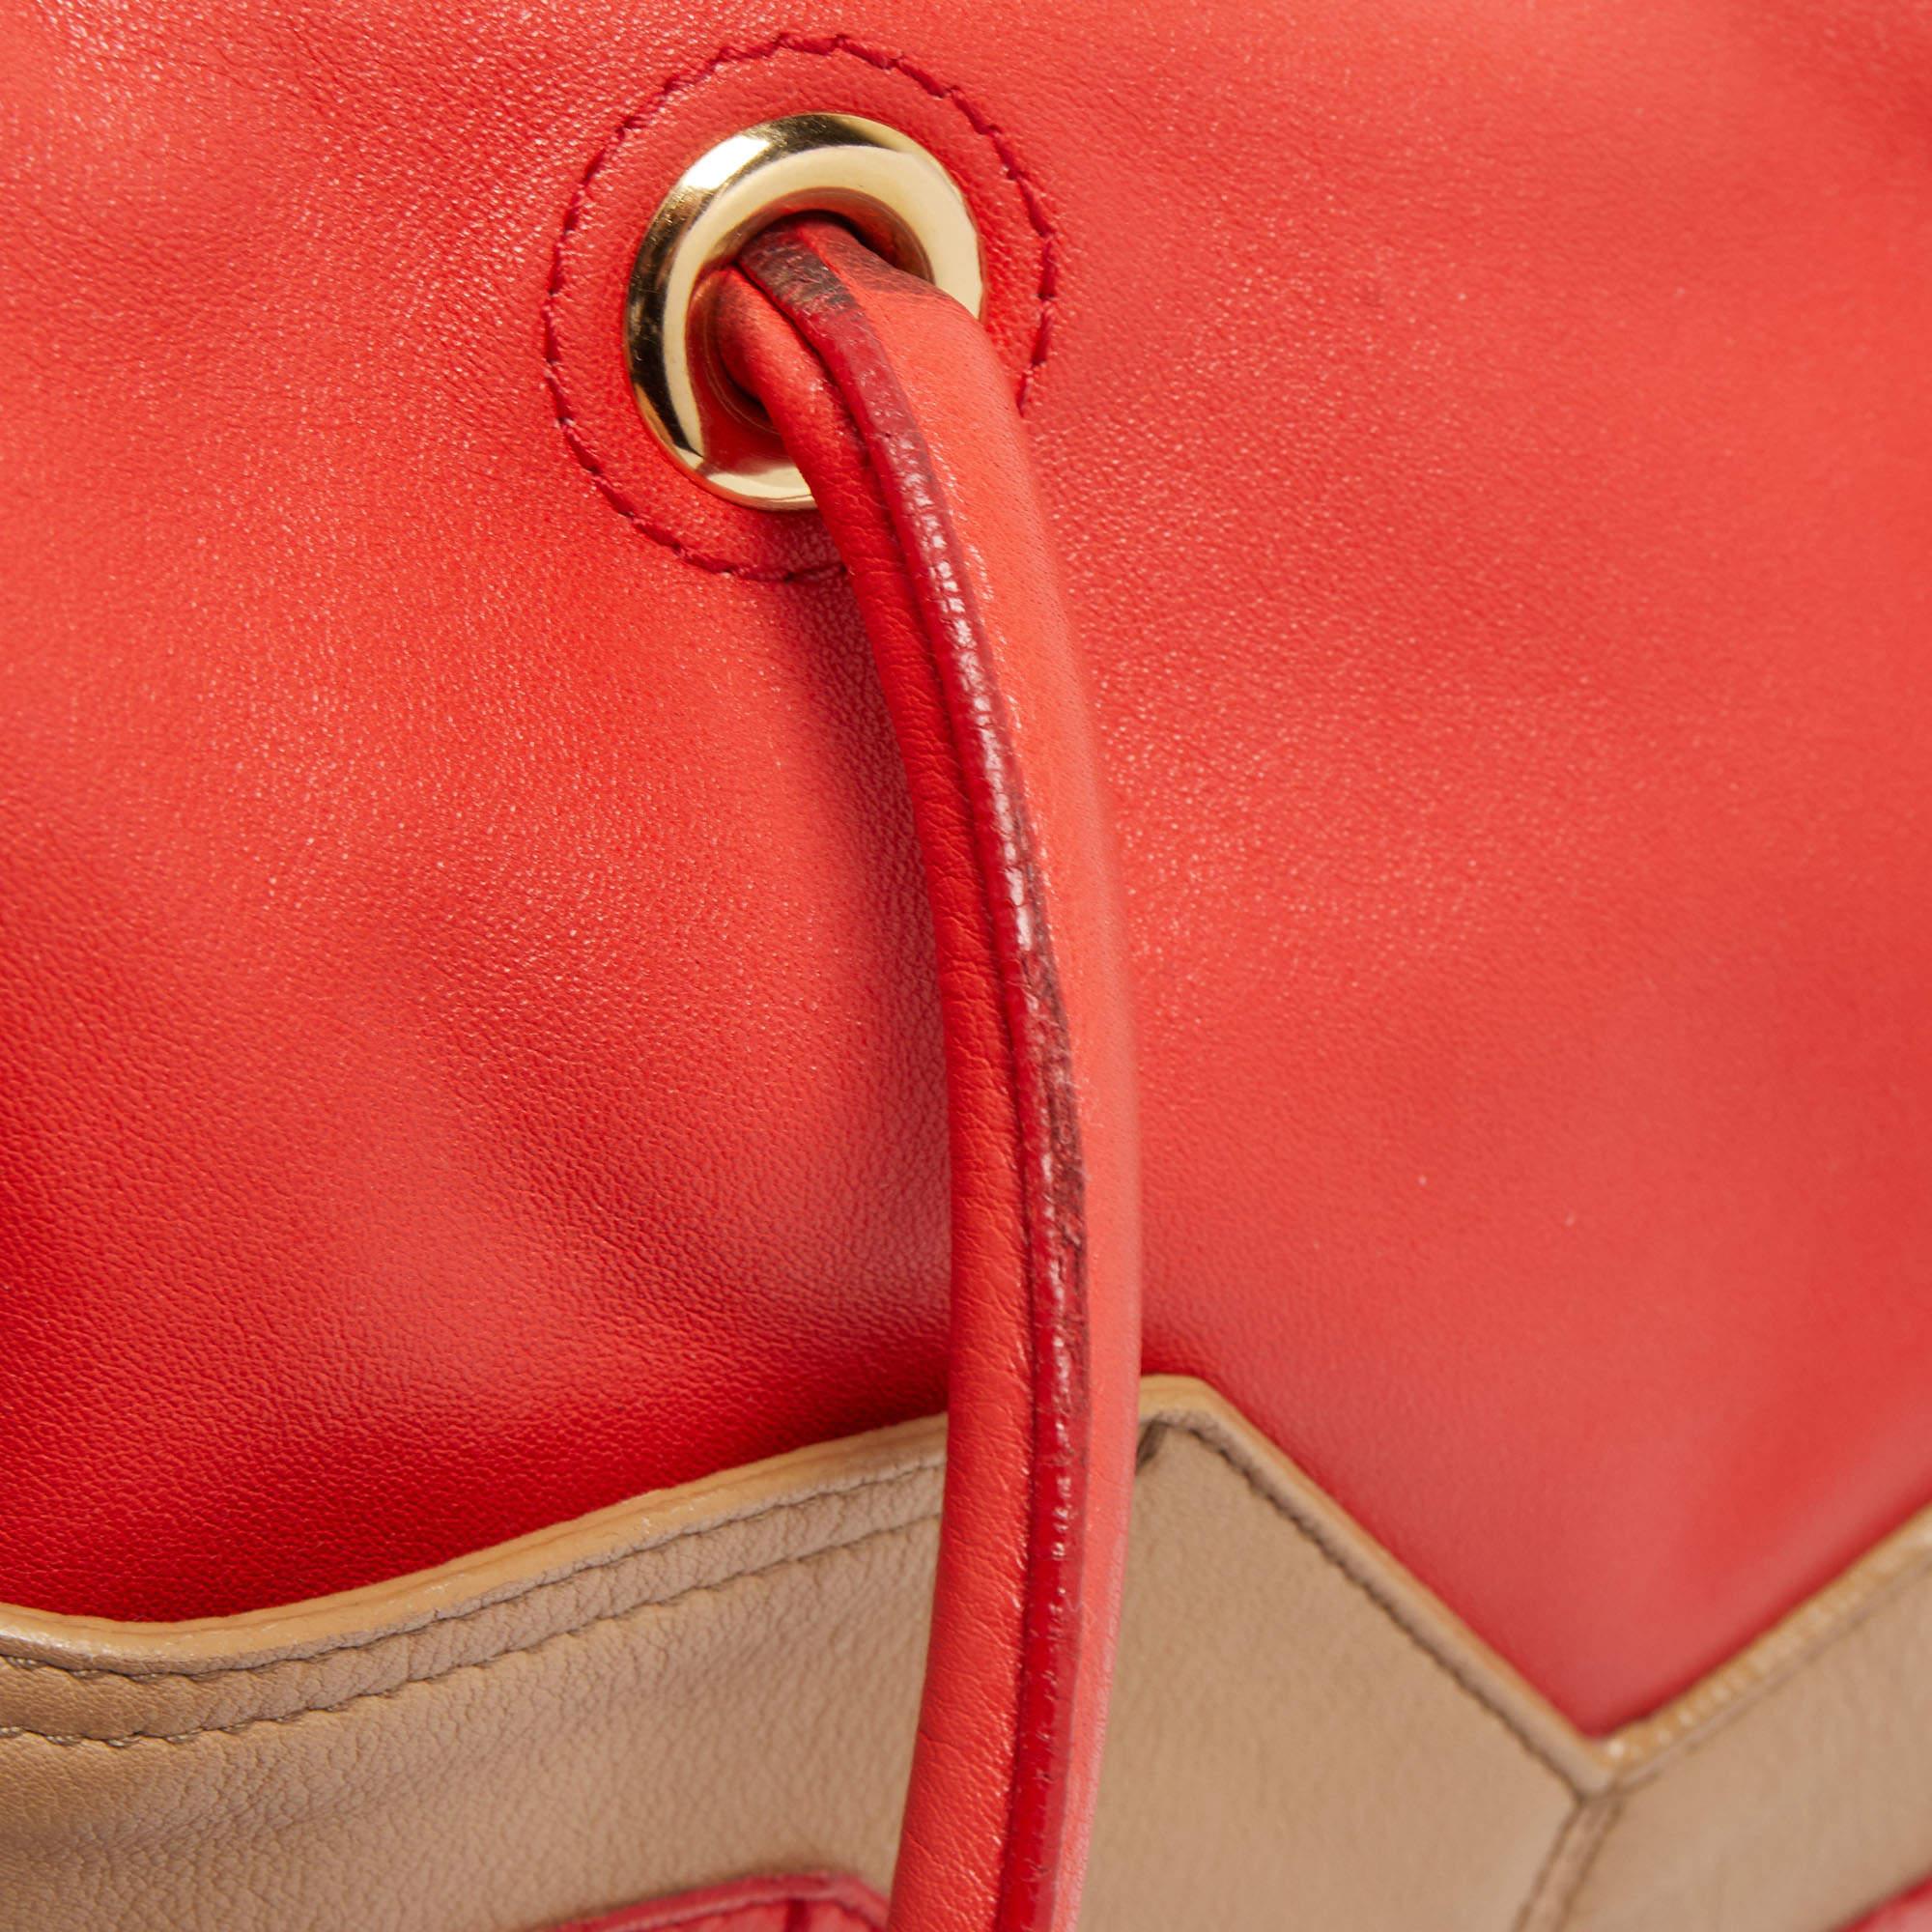 Yves Saint Laurent Red/Beige Leather Lucky Chyc Bowler Bag 5